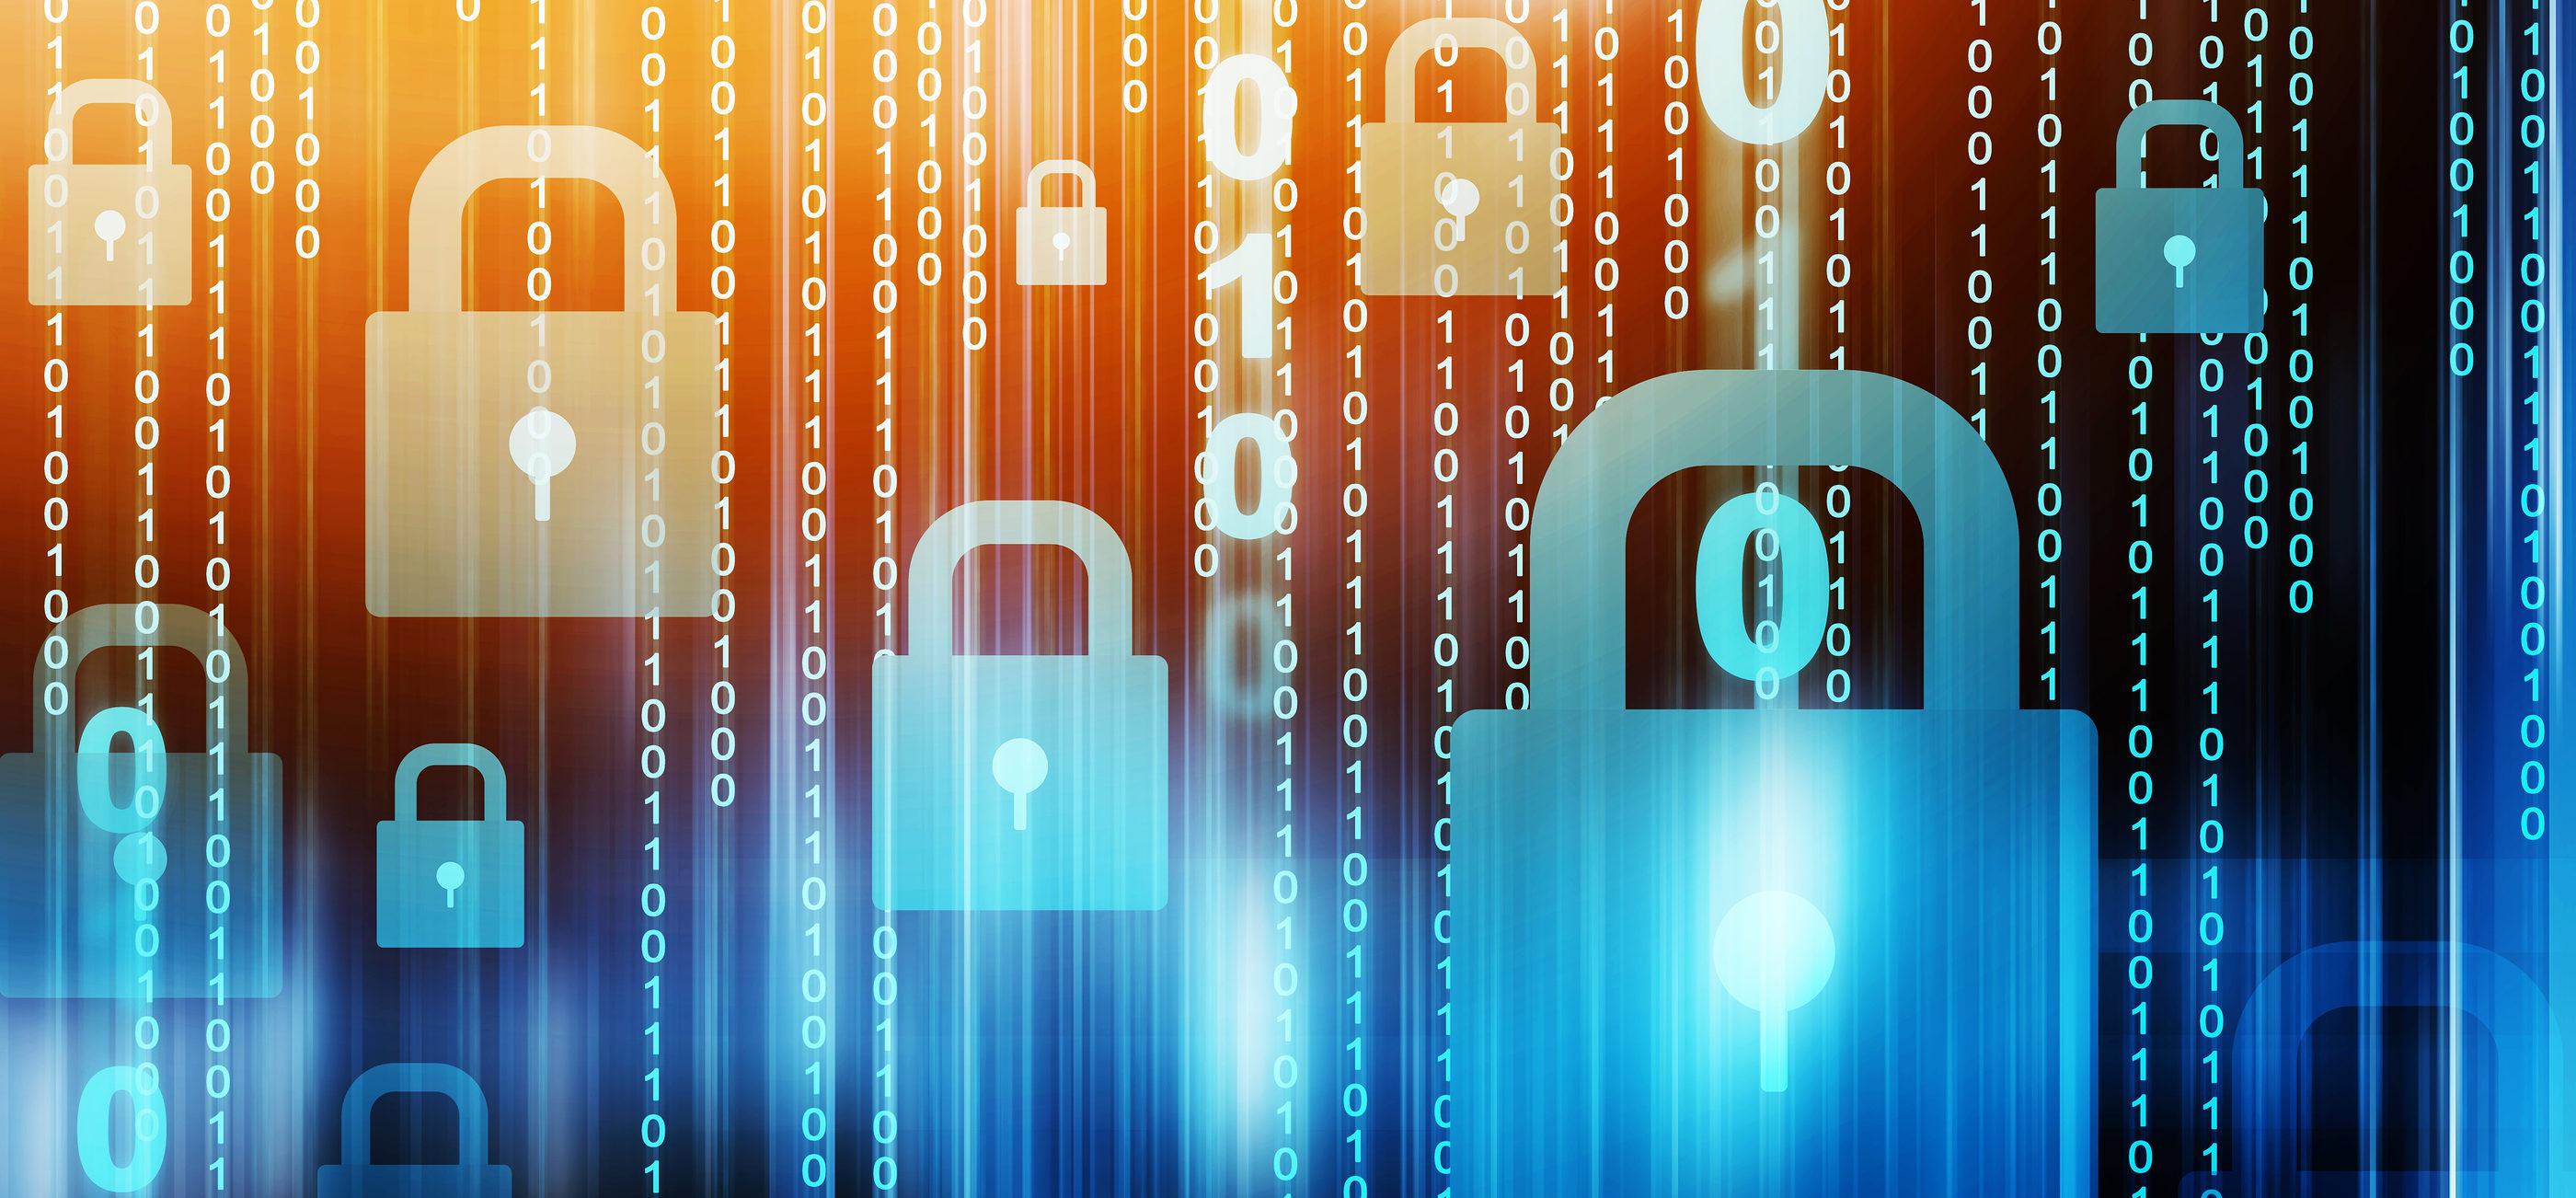 5 Practical Ways to Use the NIST Cybersecurity Framework to Strengthen Your IT Security